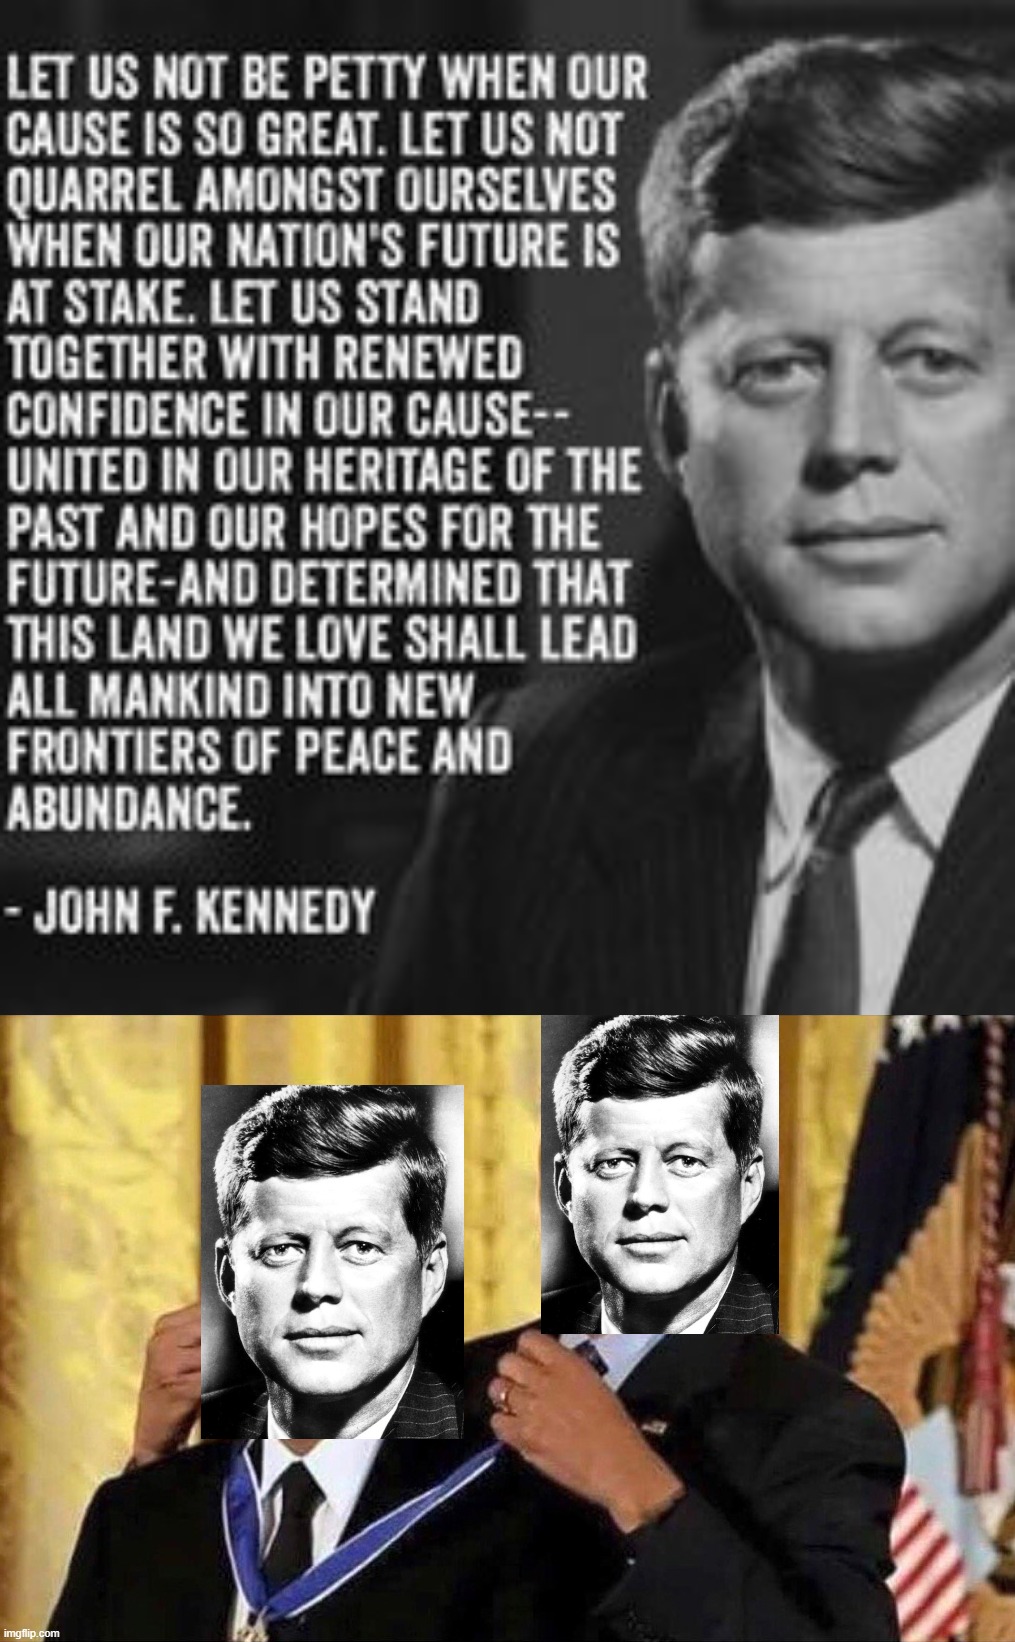 Bet he felt smart after saying this. Pretty words that mean nothing. Just like another community organizer & certain "President" | image tagged in jfk quote petty quarrels,obama medal,jfk,obama,community organizer,pretty words | made w/ Imgflip meme maker